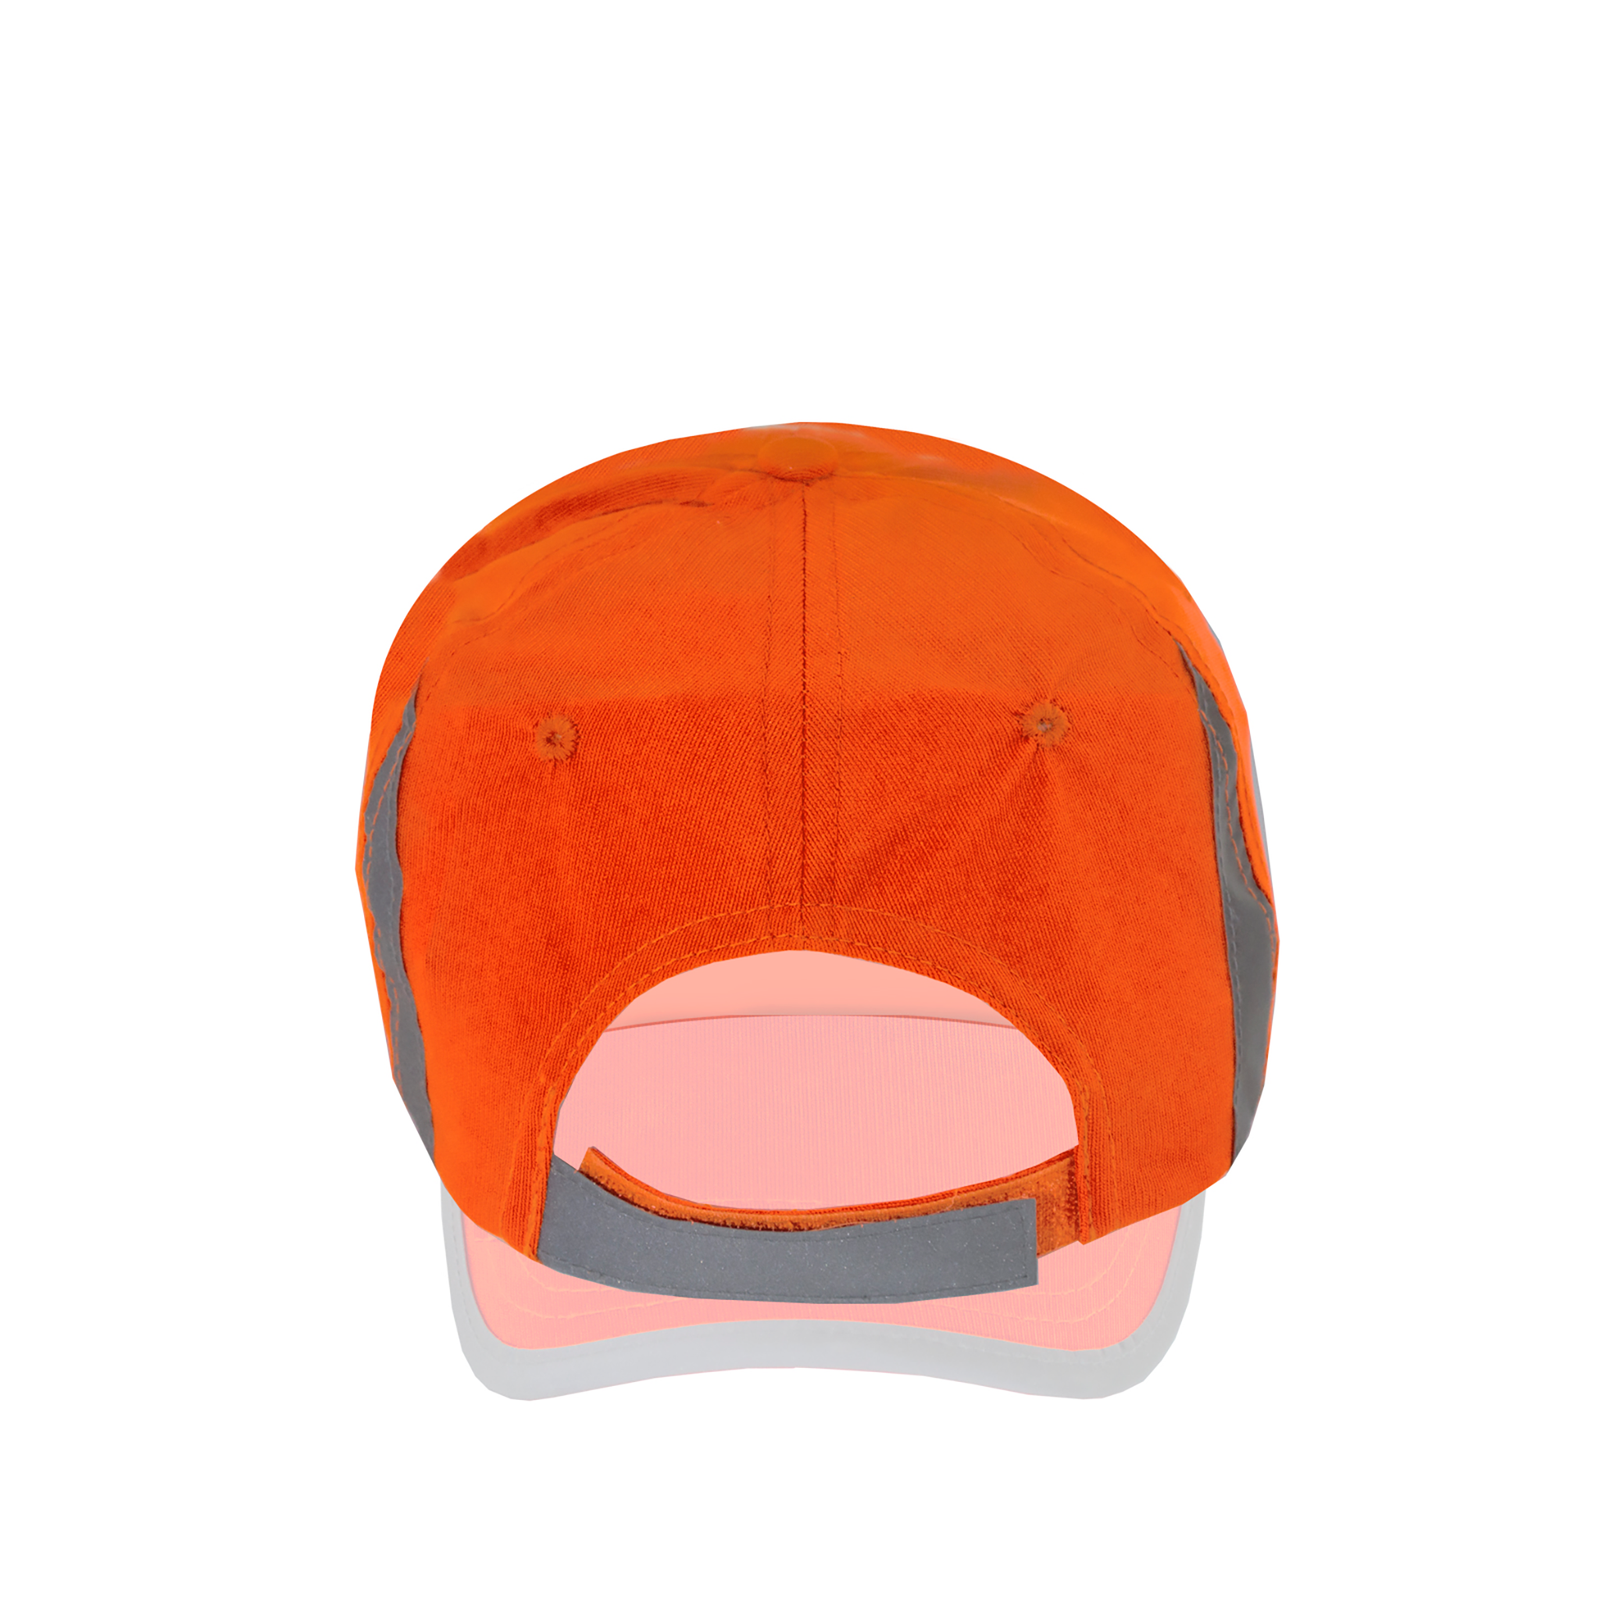 Back view of the Hi-vis orange JORESTECH safety cap with reflective stripes over white background